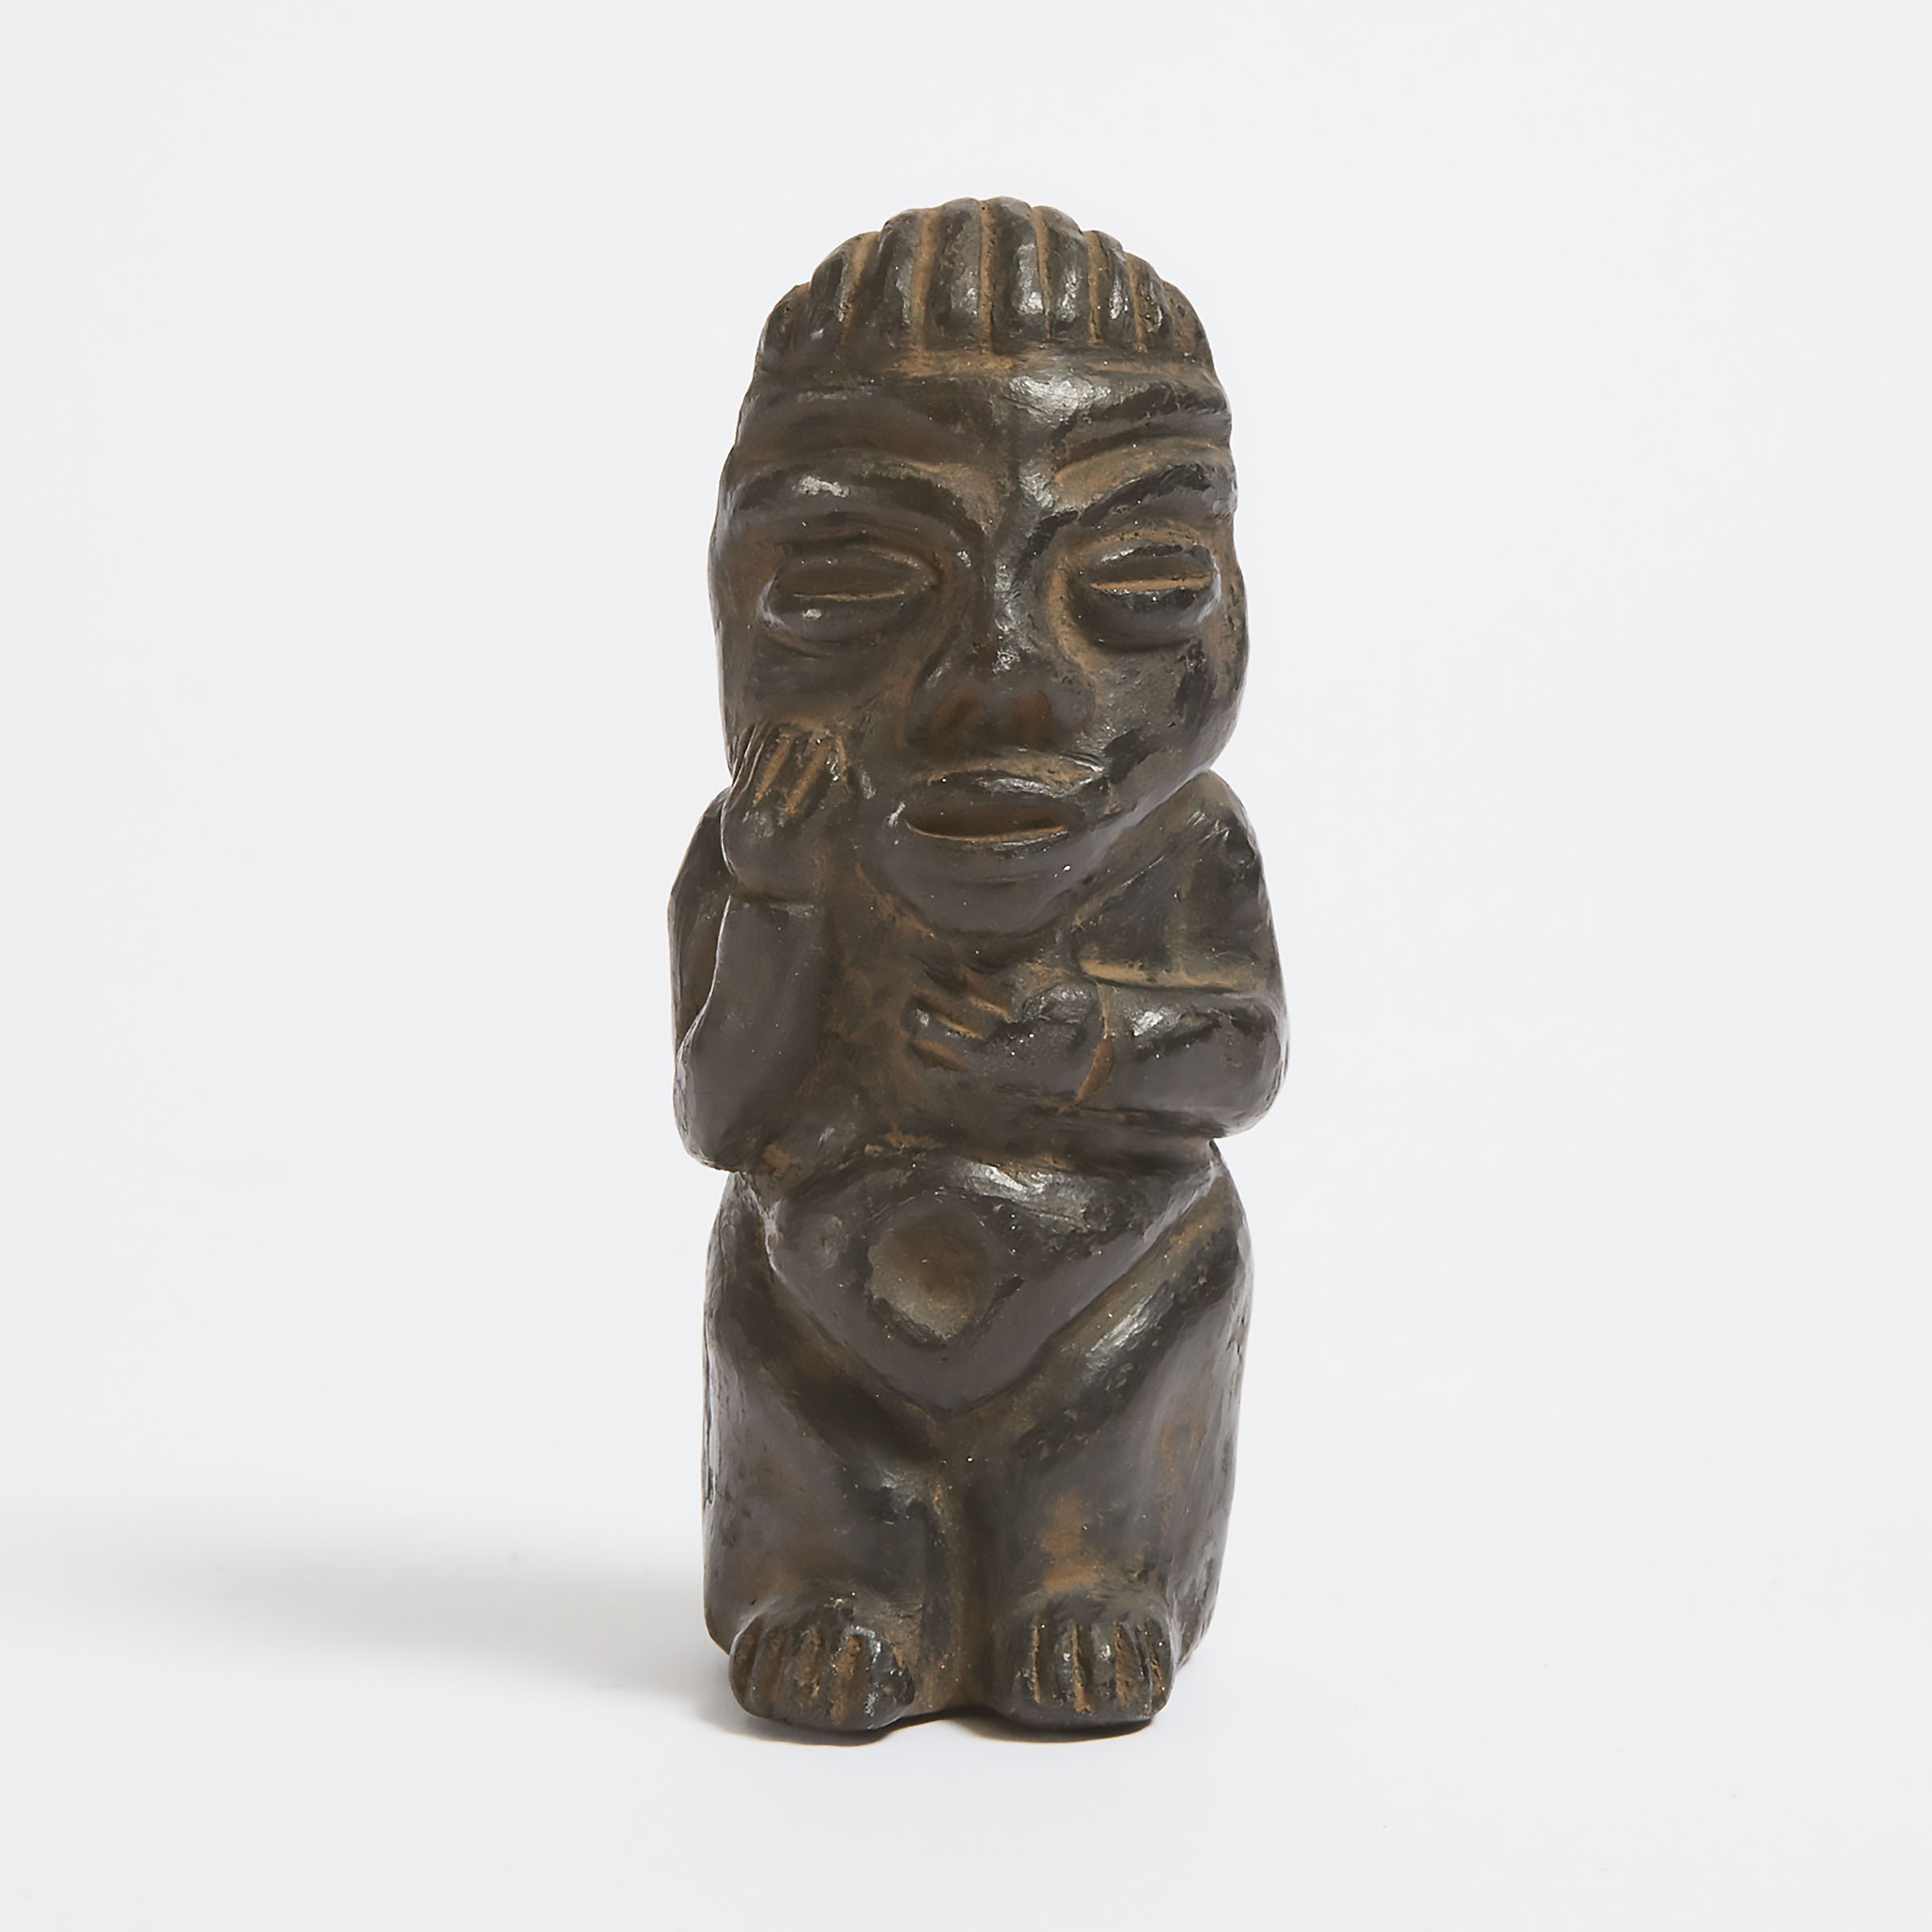 West African Terra Cotta Seated Figure, 20th century